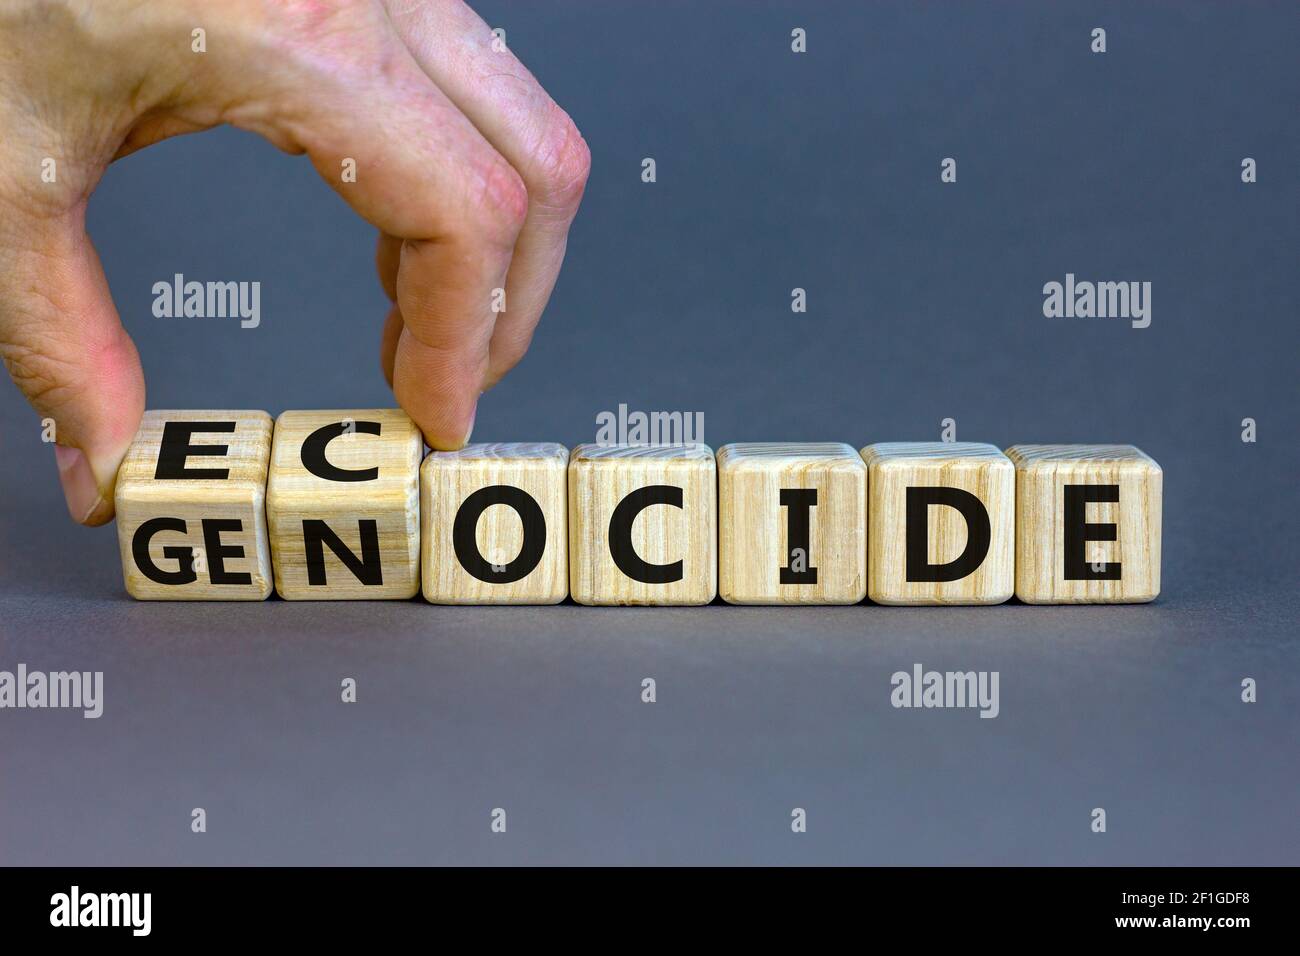 Ecocide or genocide symbol. Businessman turns cubes and changes the word genocide to ecocide. Beautiful grey background, copy space. Business, ecologi Stock Photo